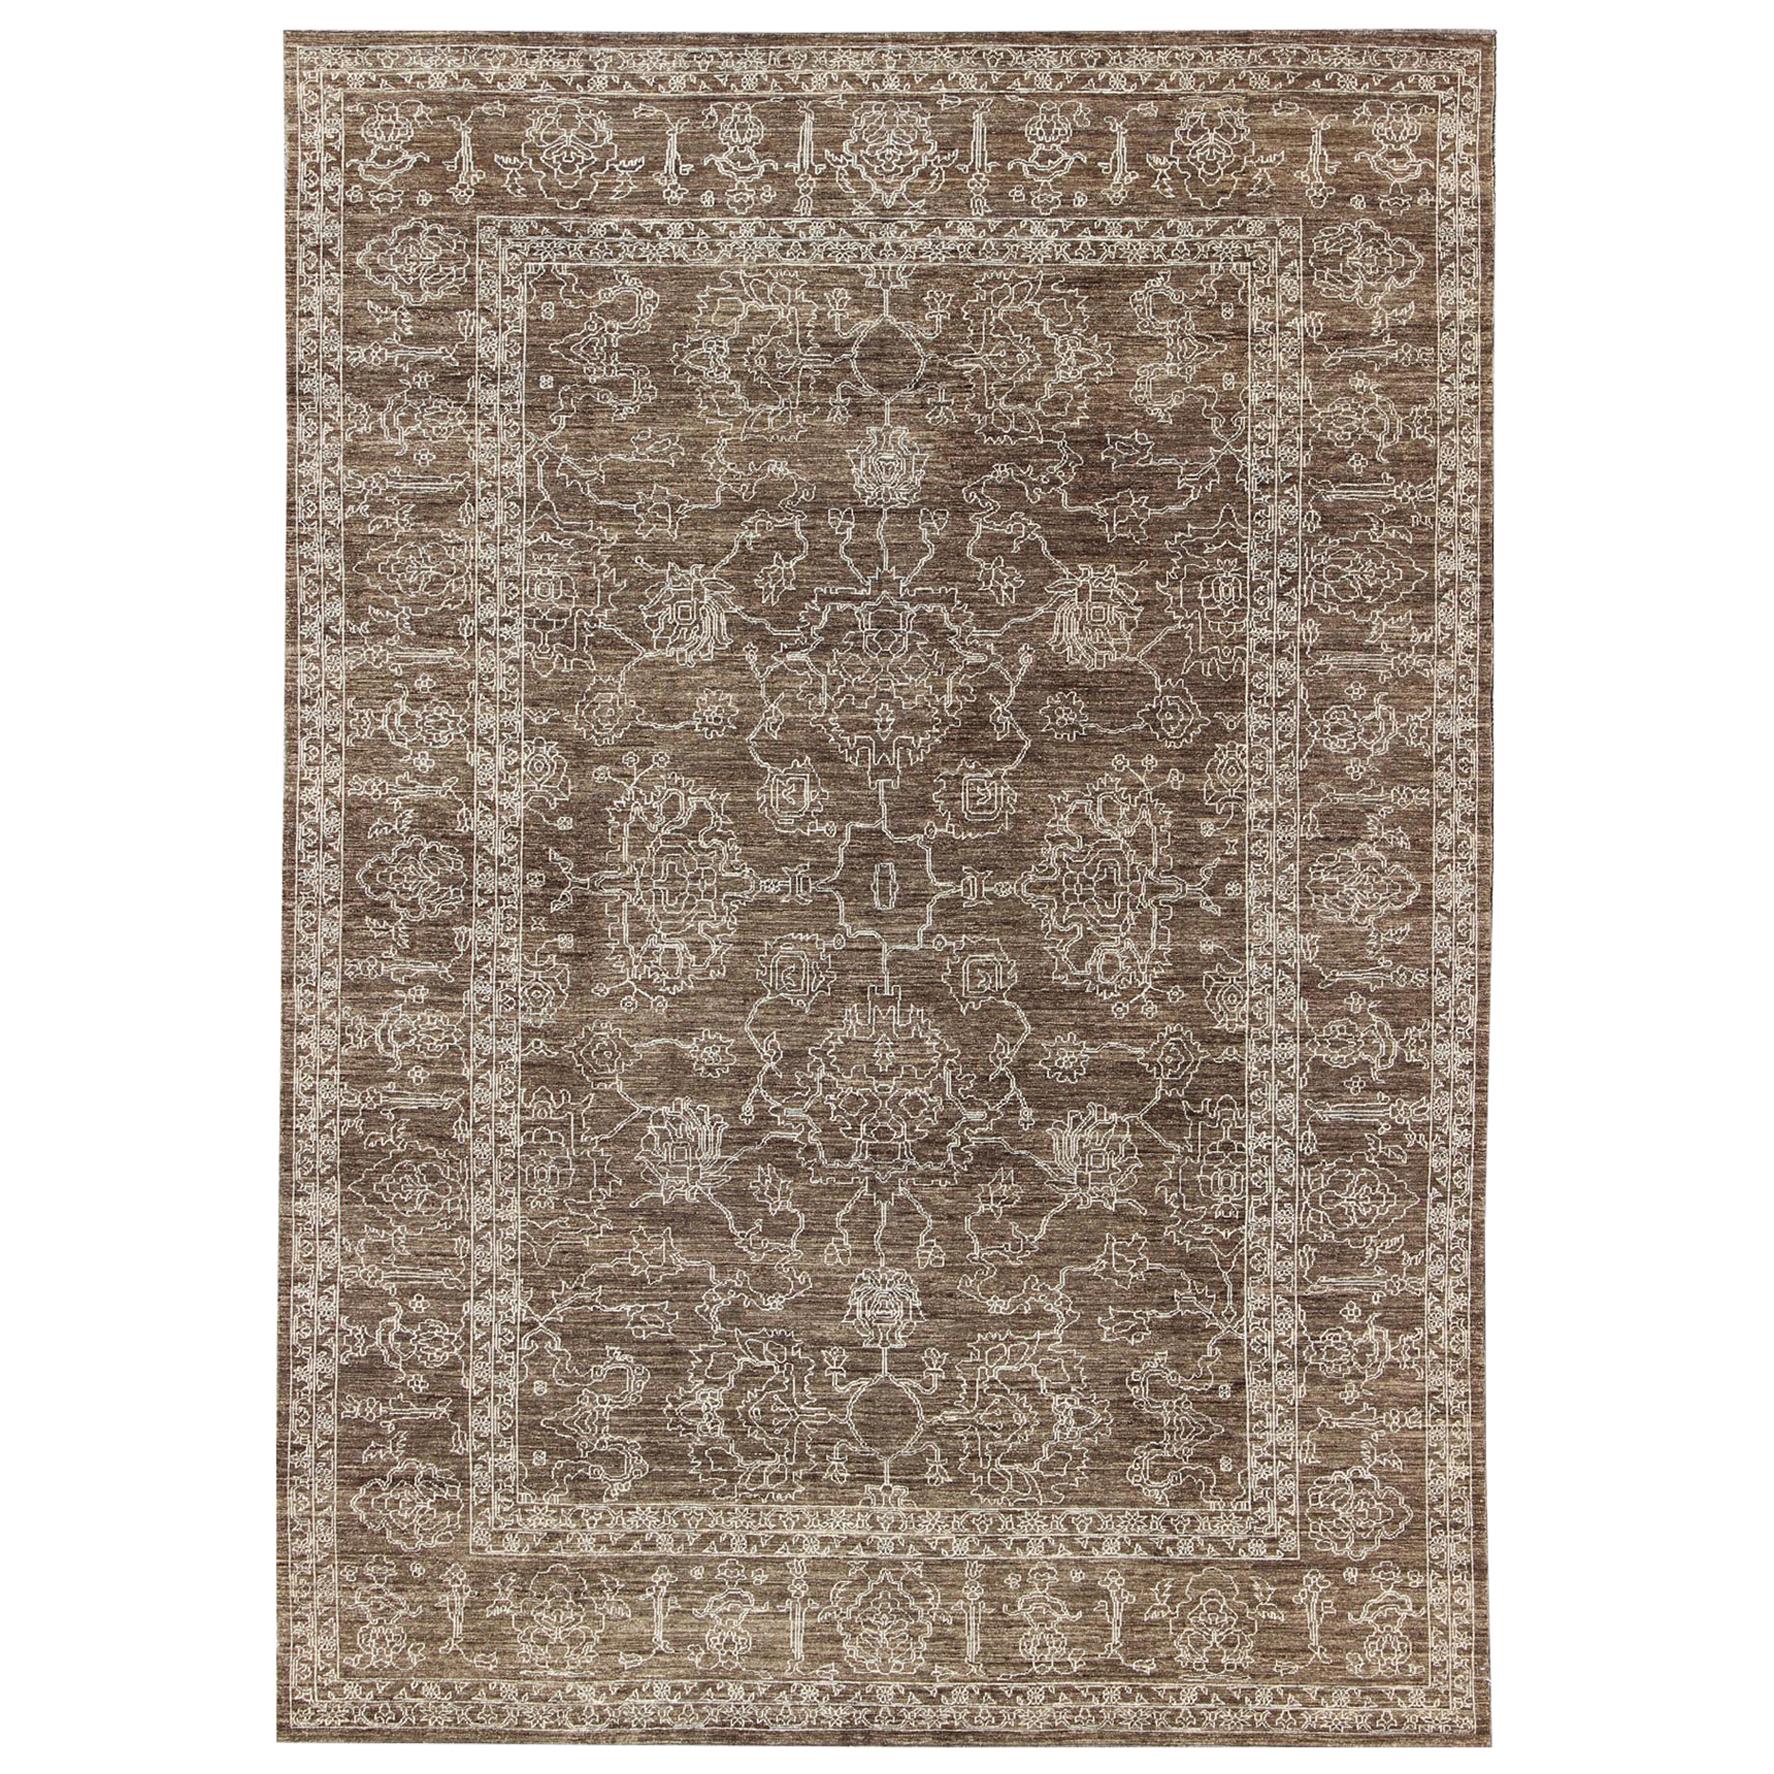 Fine Transitional Rug with Stylized Geometric Motifs in Brown & Tan